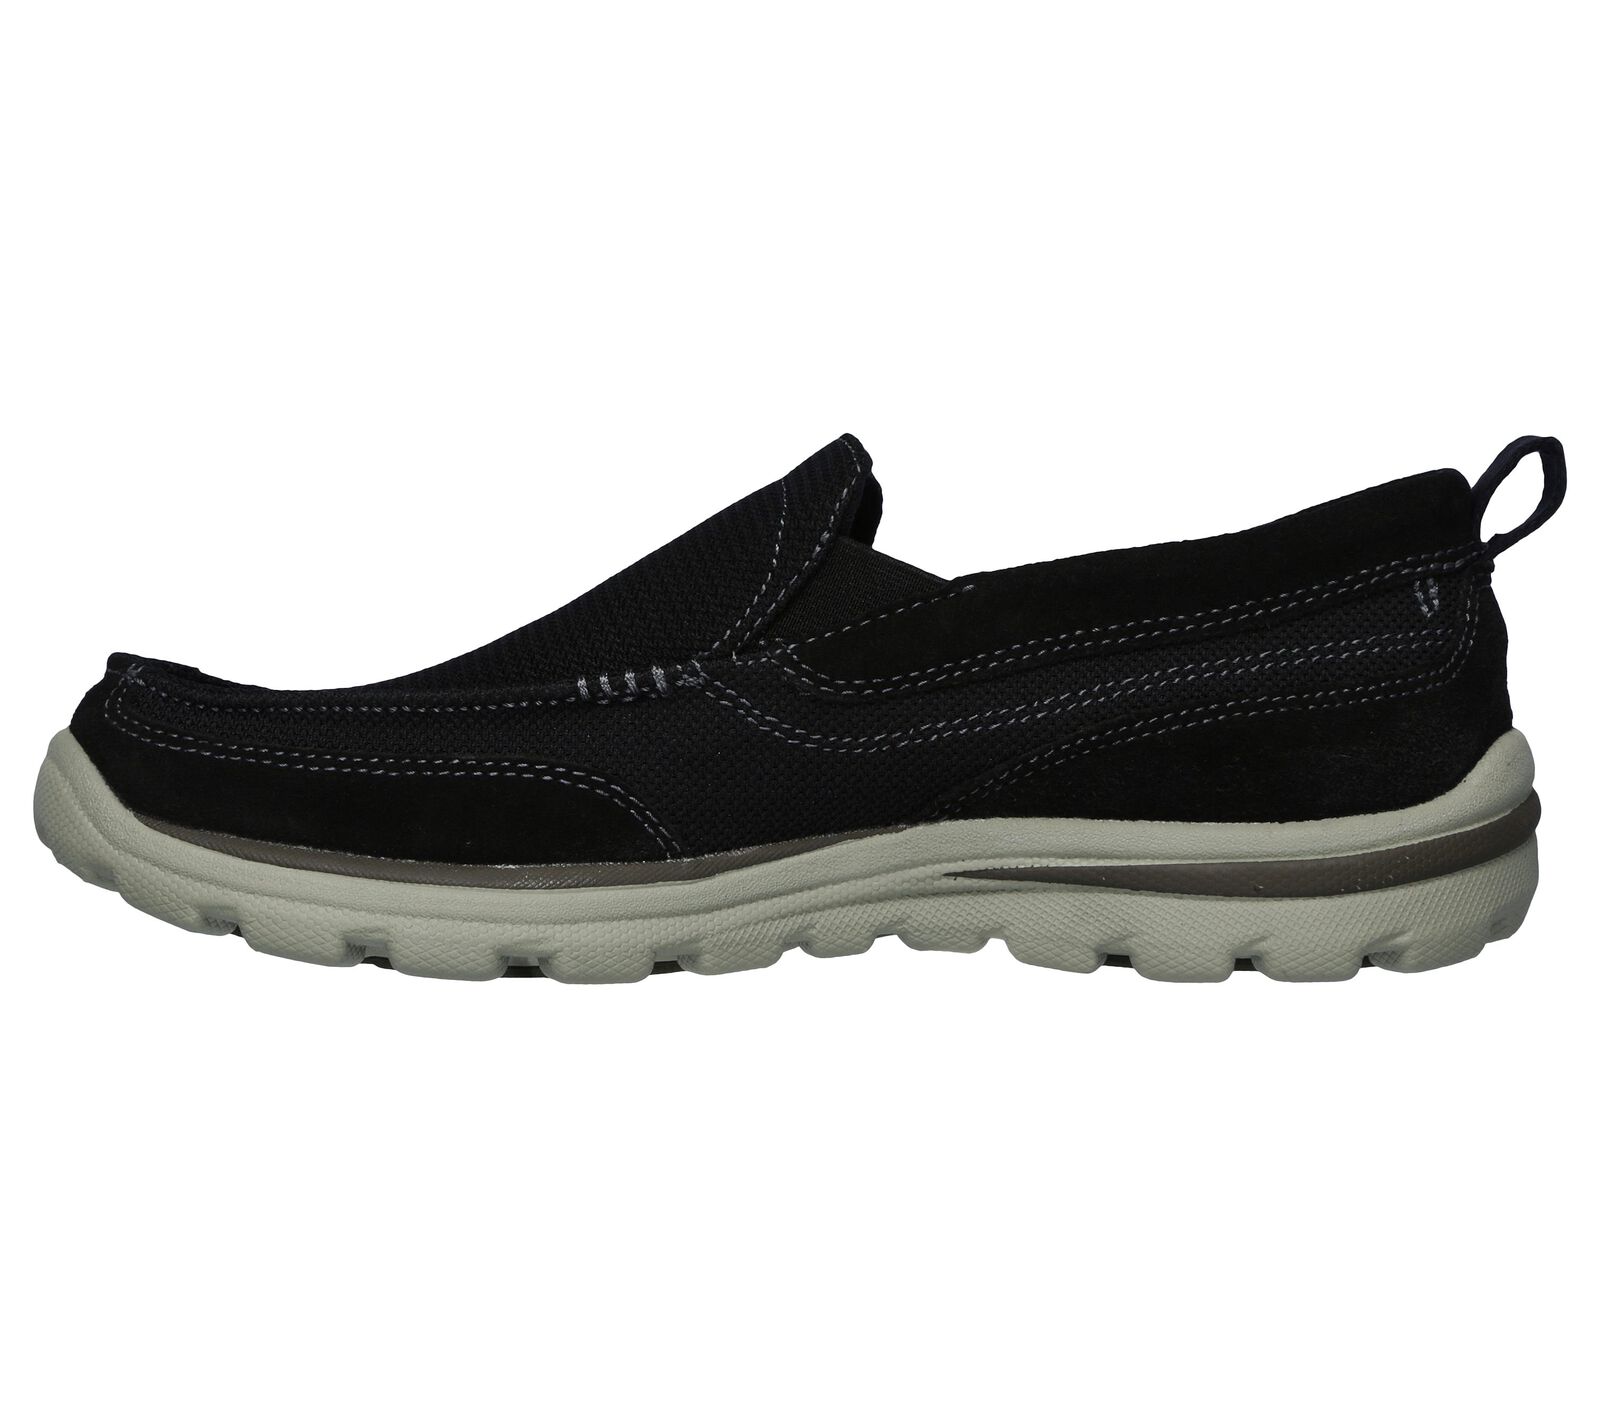 Shop the Relaxed Fit: Superior - Milford | SKECHERS